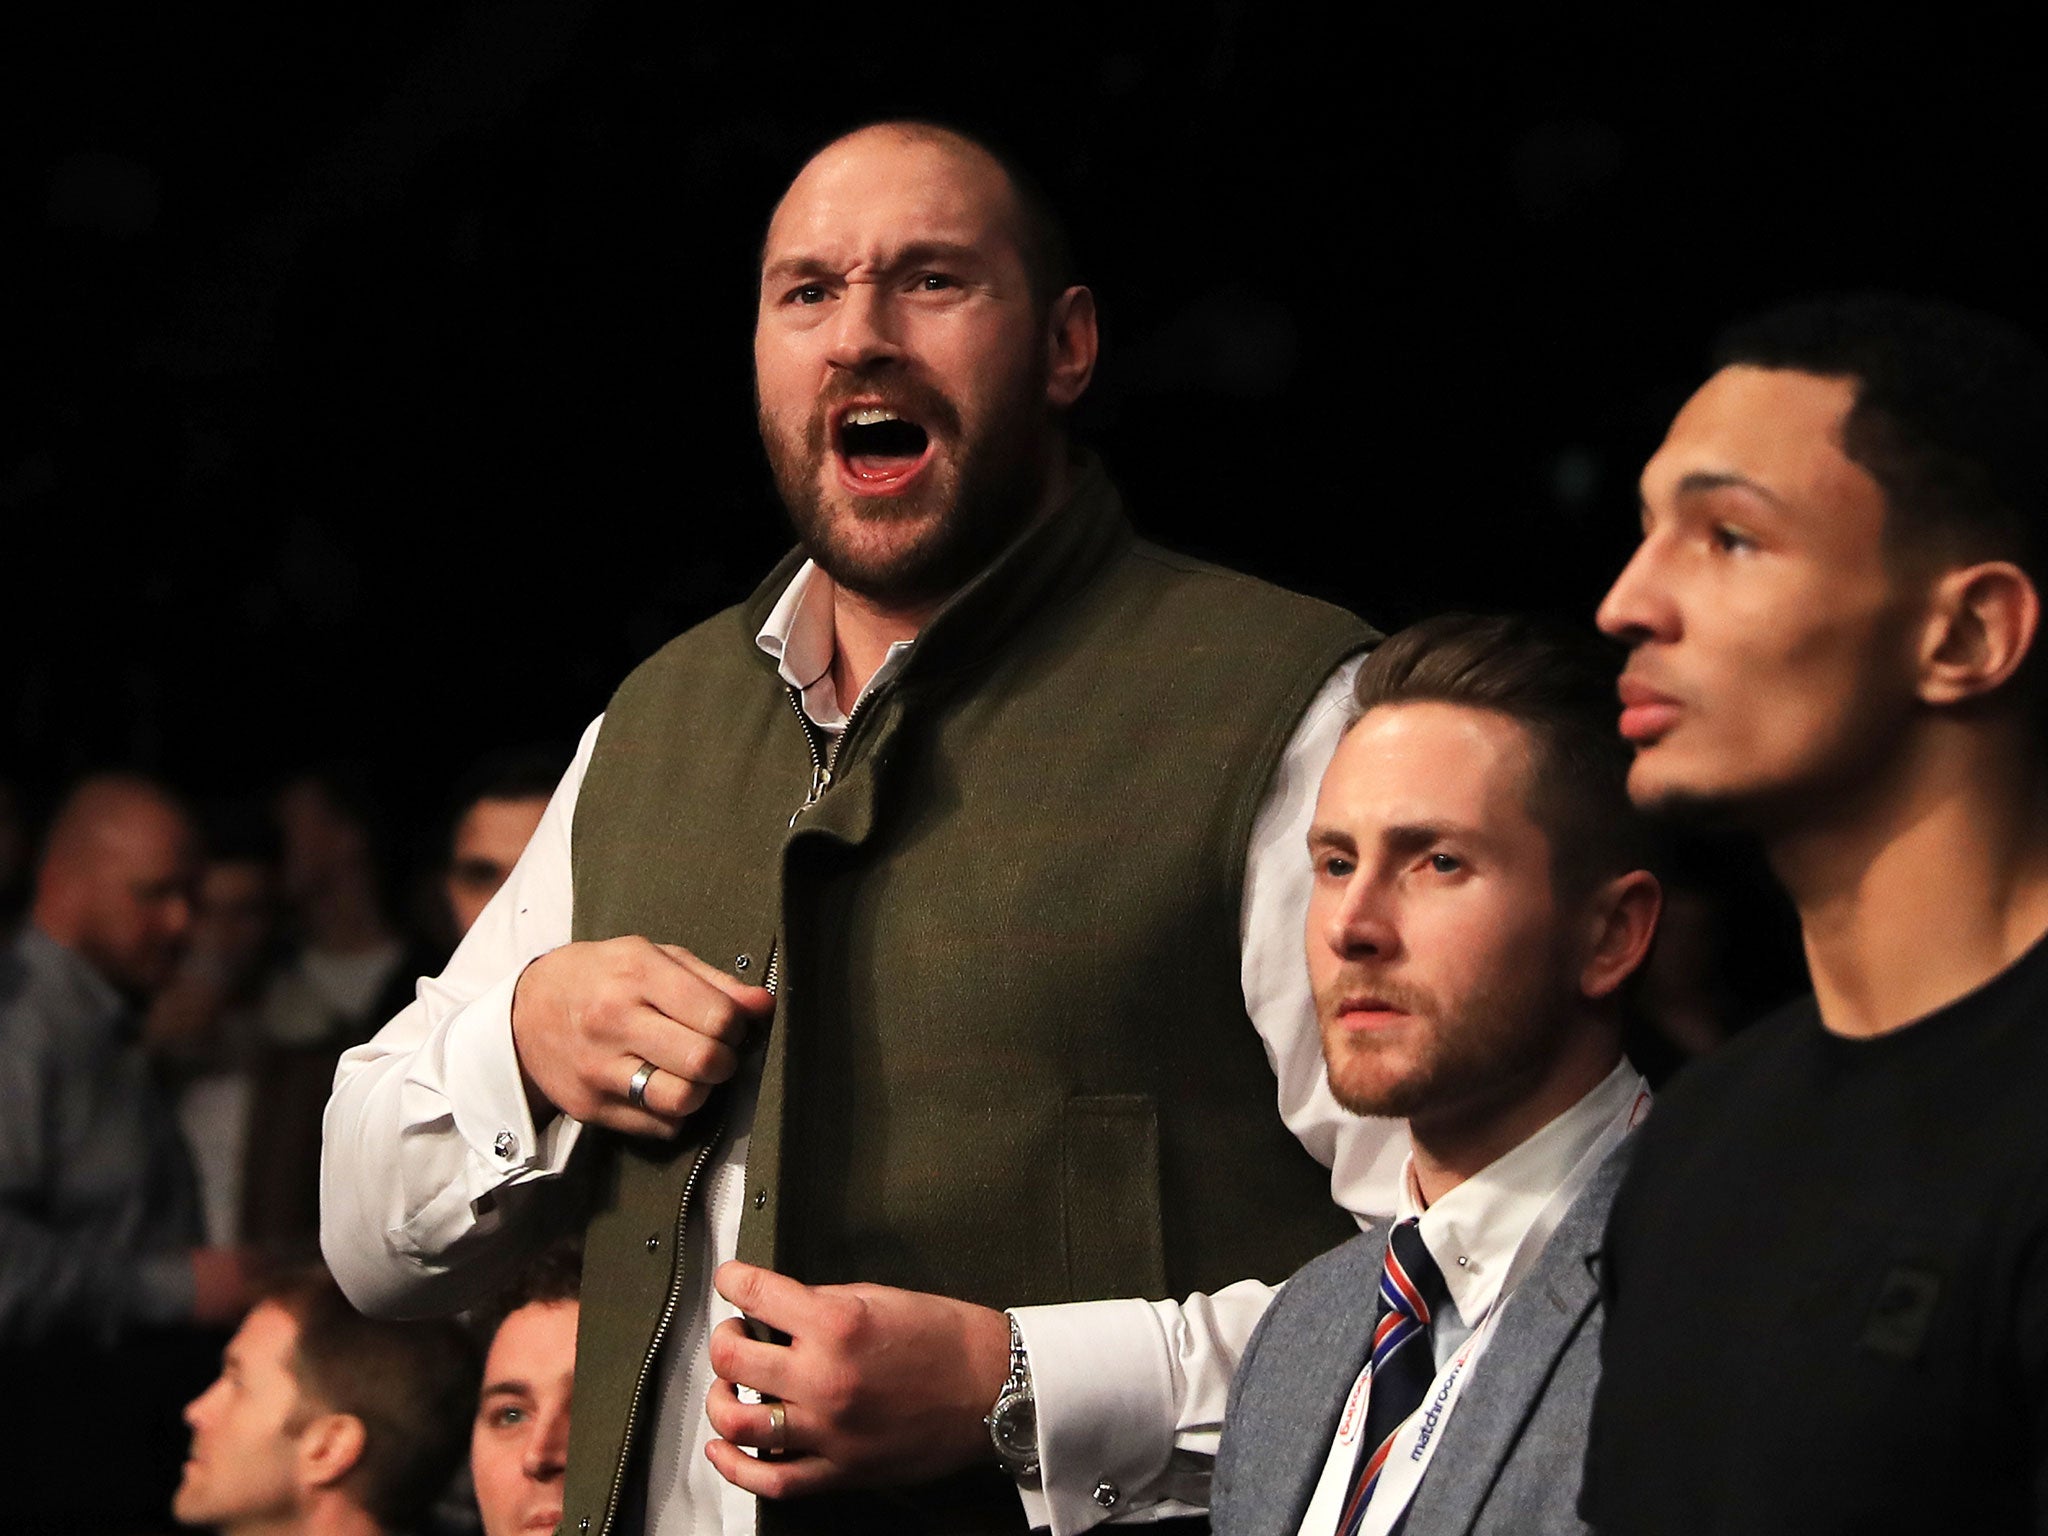 Now Tyson Fury needs to lose weight